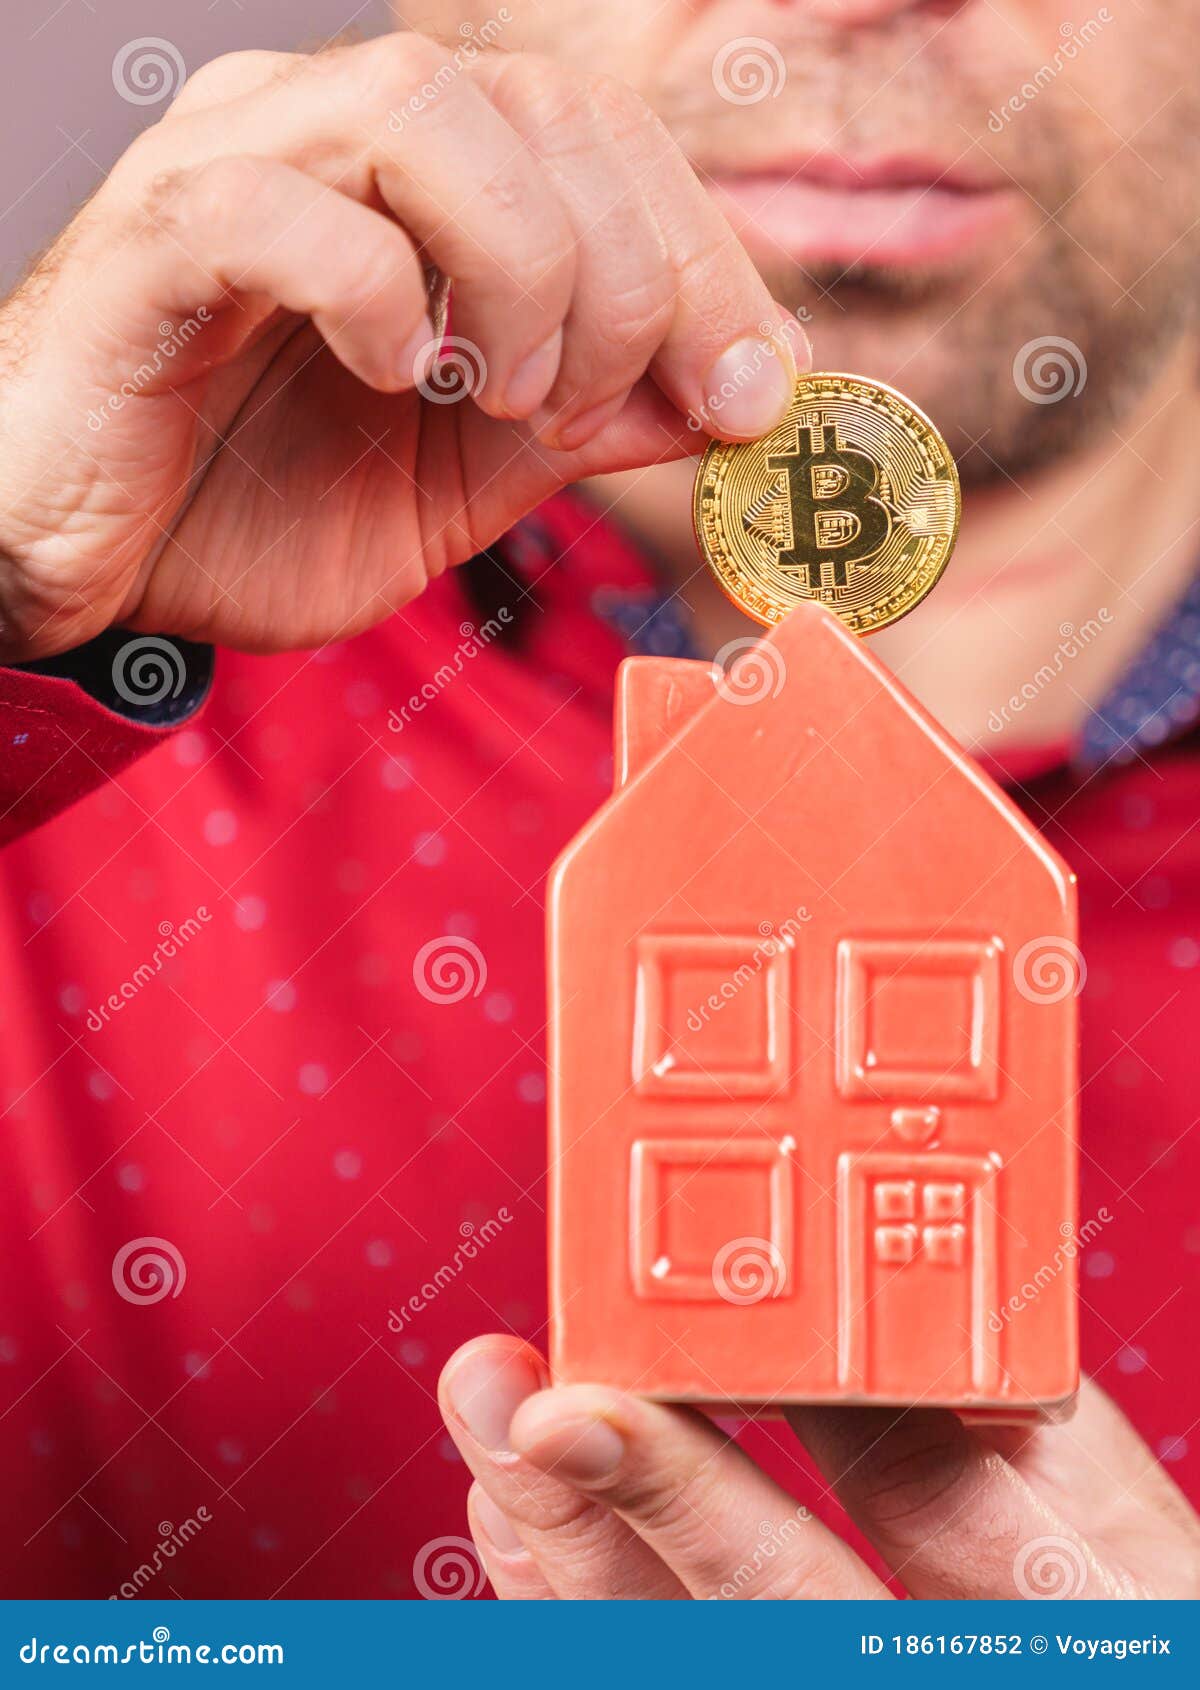 man mortgages house to buy bitcoin